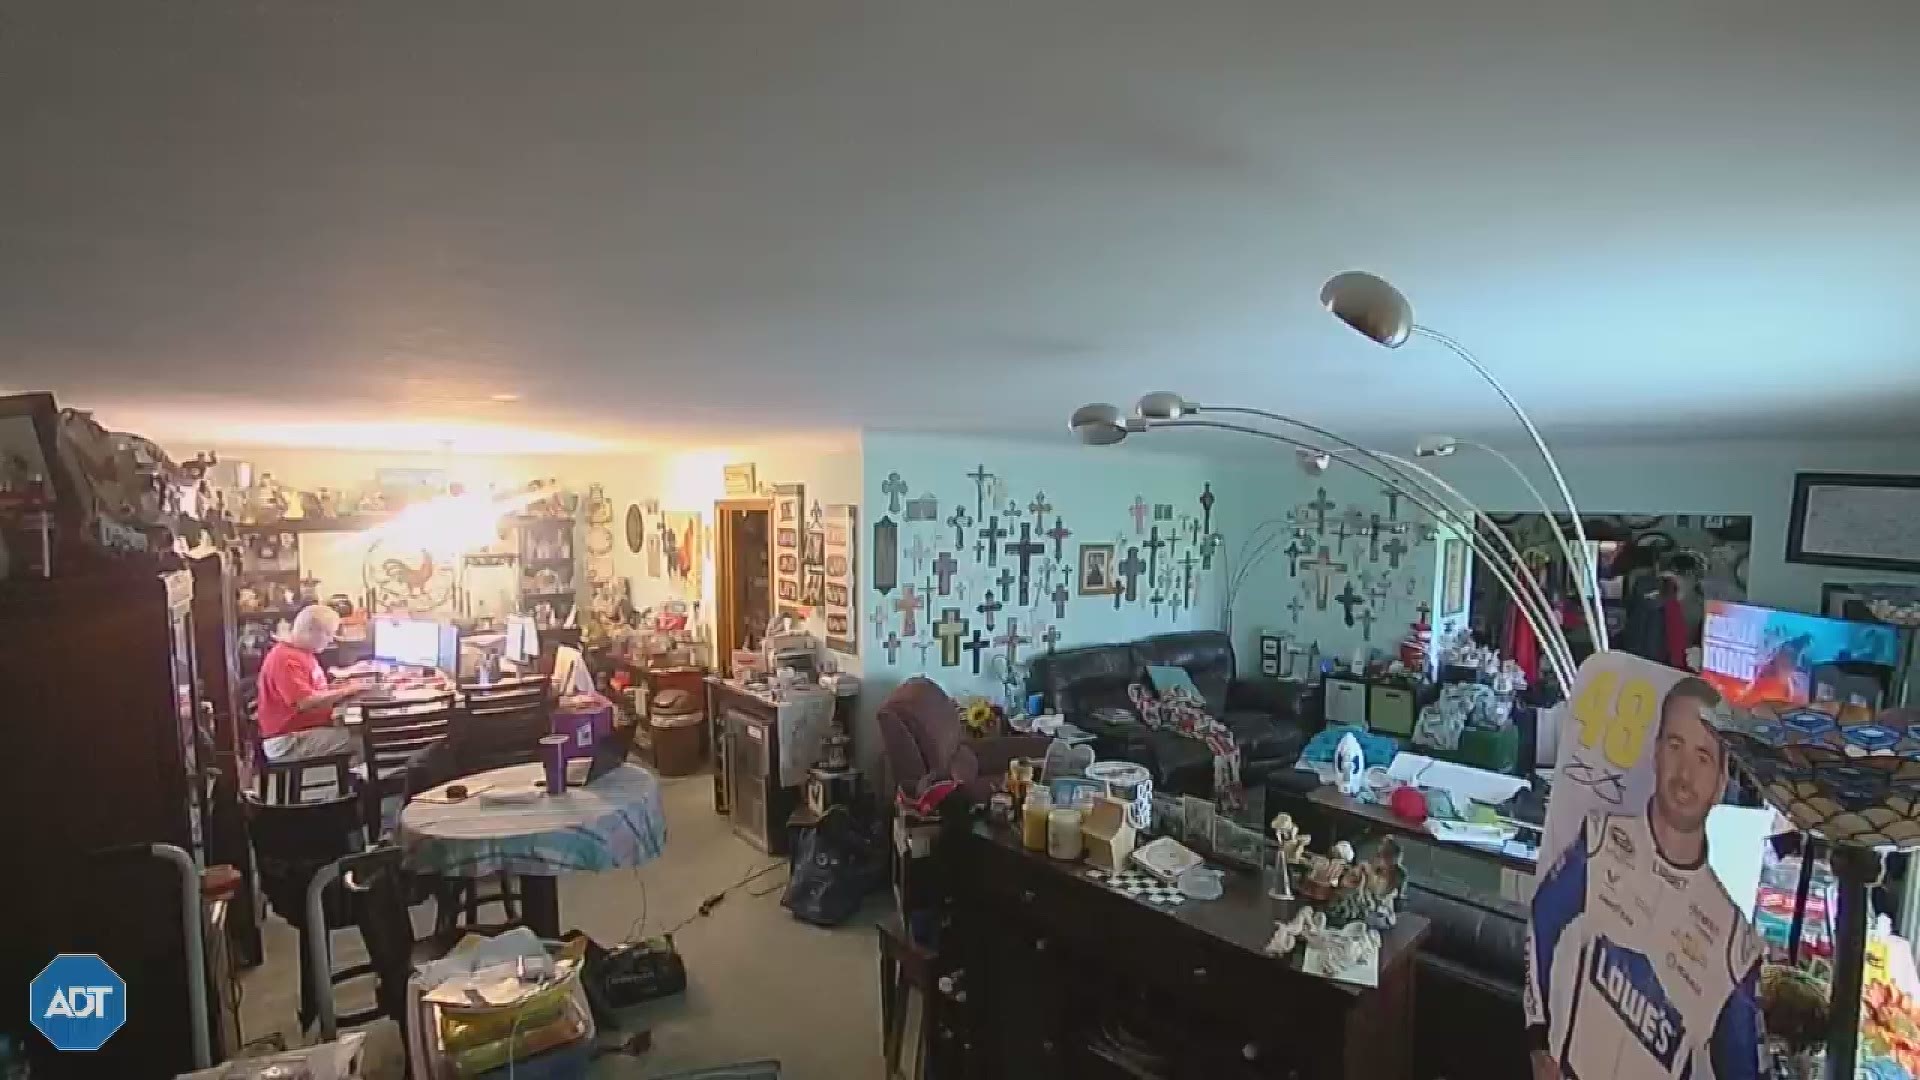 John Blume was pushed across the room by a car that crashed into his dining room. Video credit: John Blume.